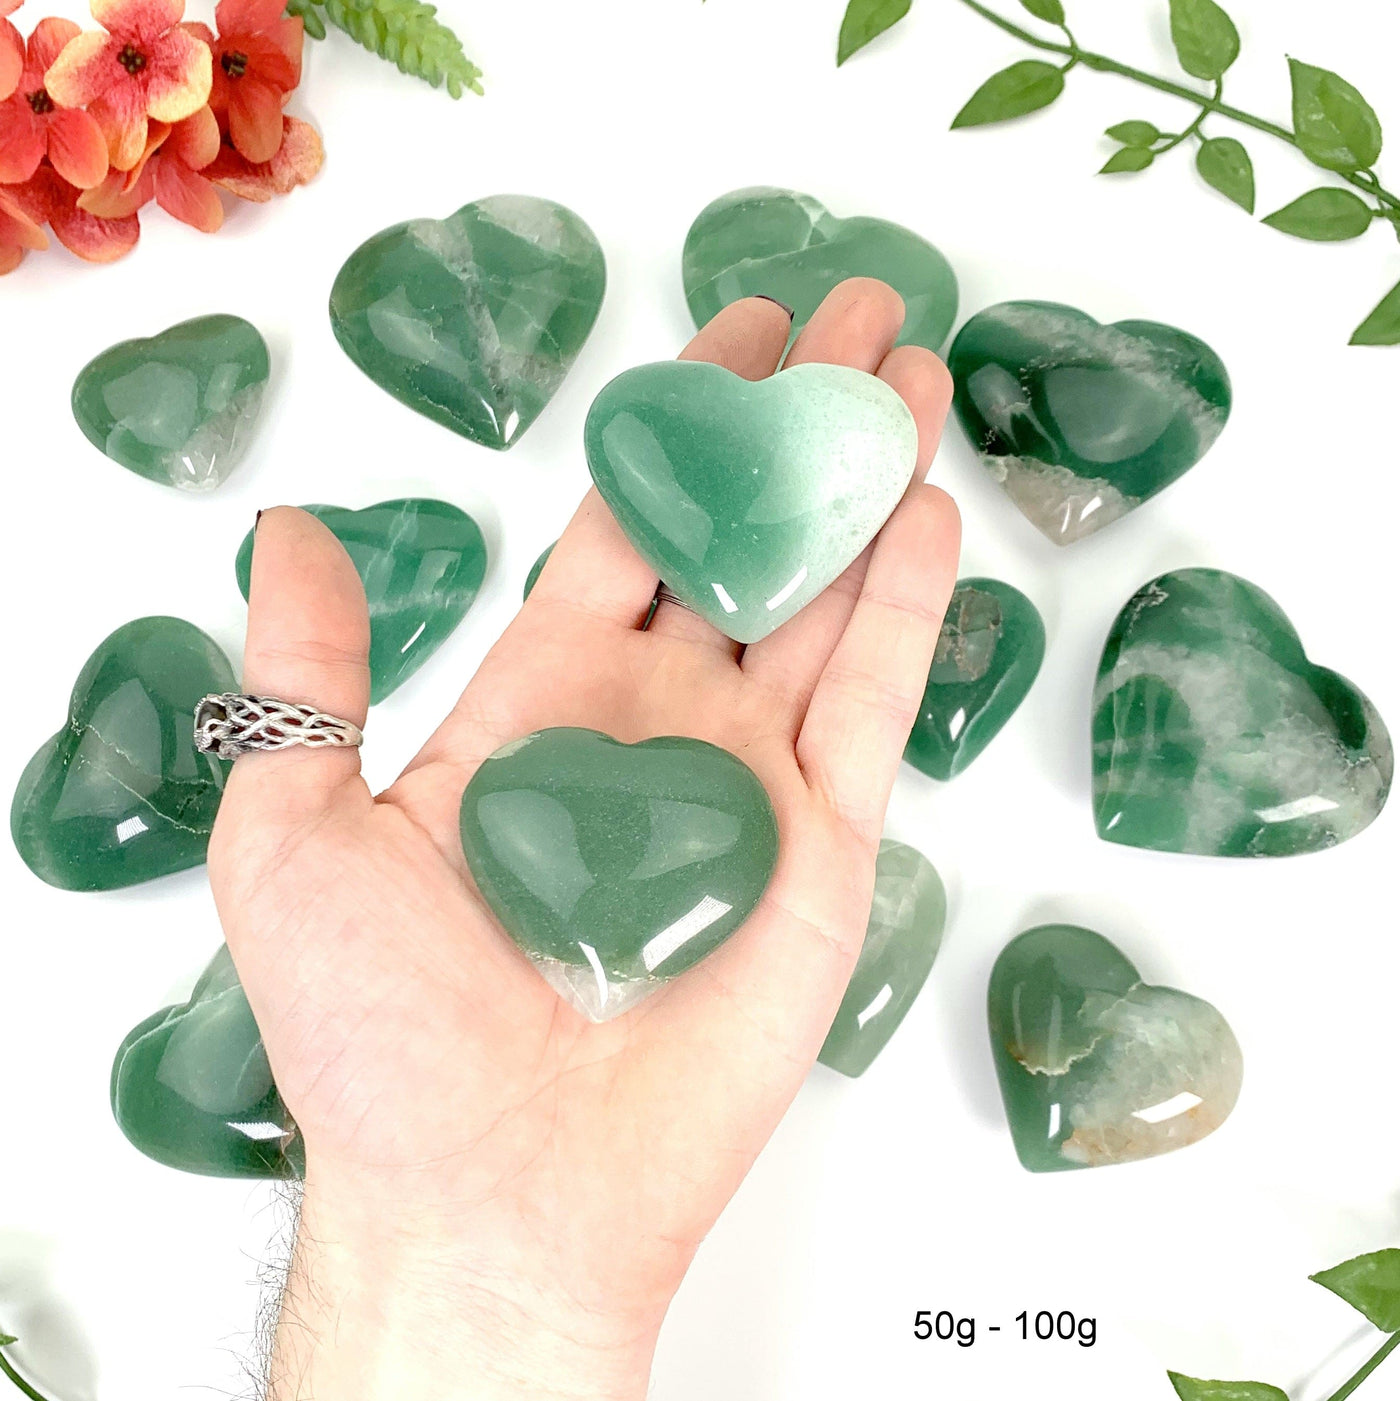 two 50g - 100g green quartz hearts in hand with a white background